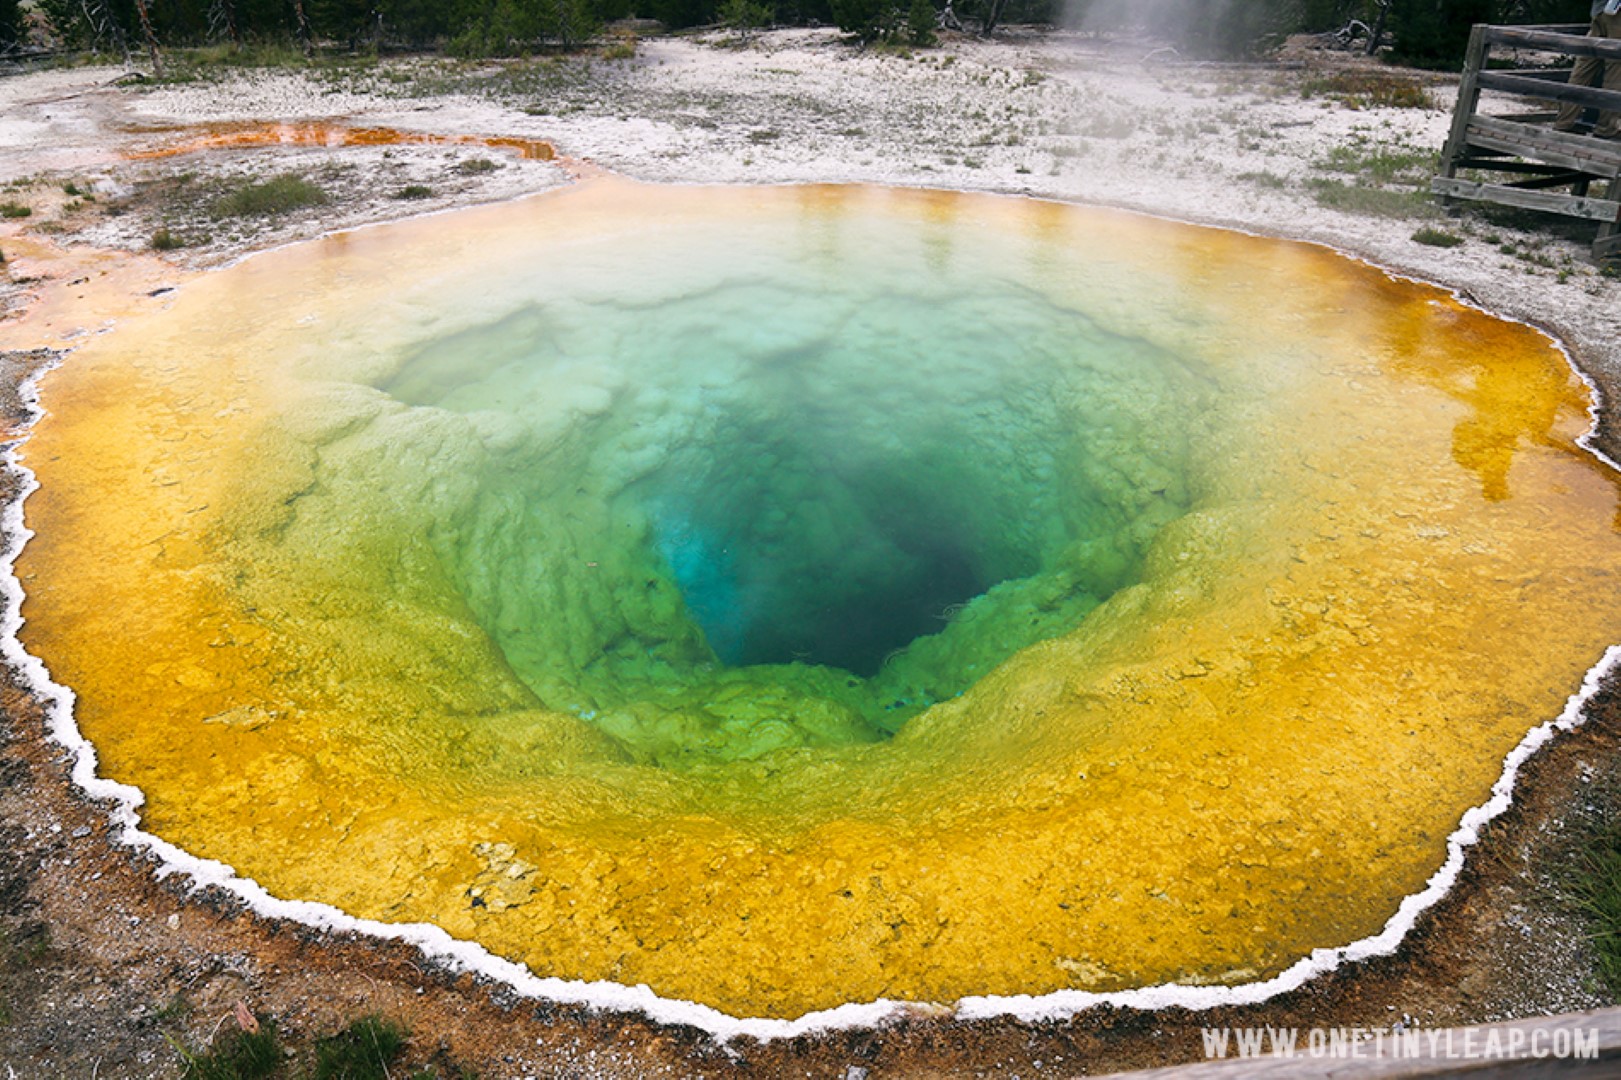 Yellowstone- the perfect place for a family vacation in the summer